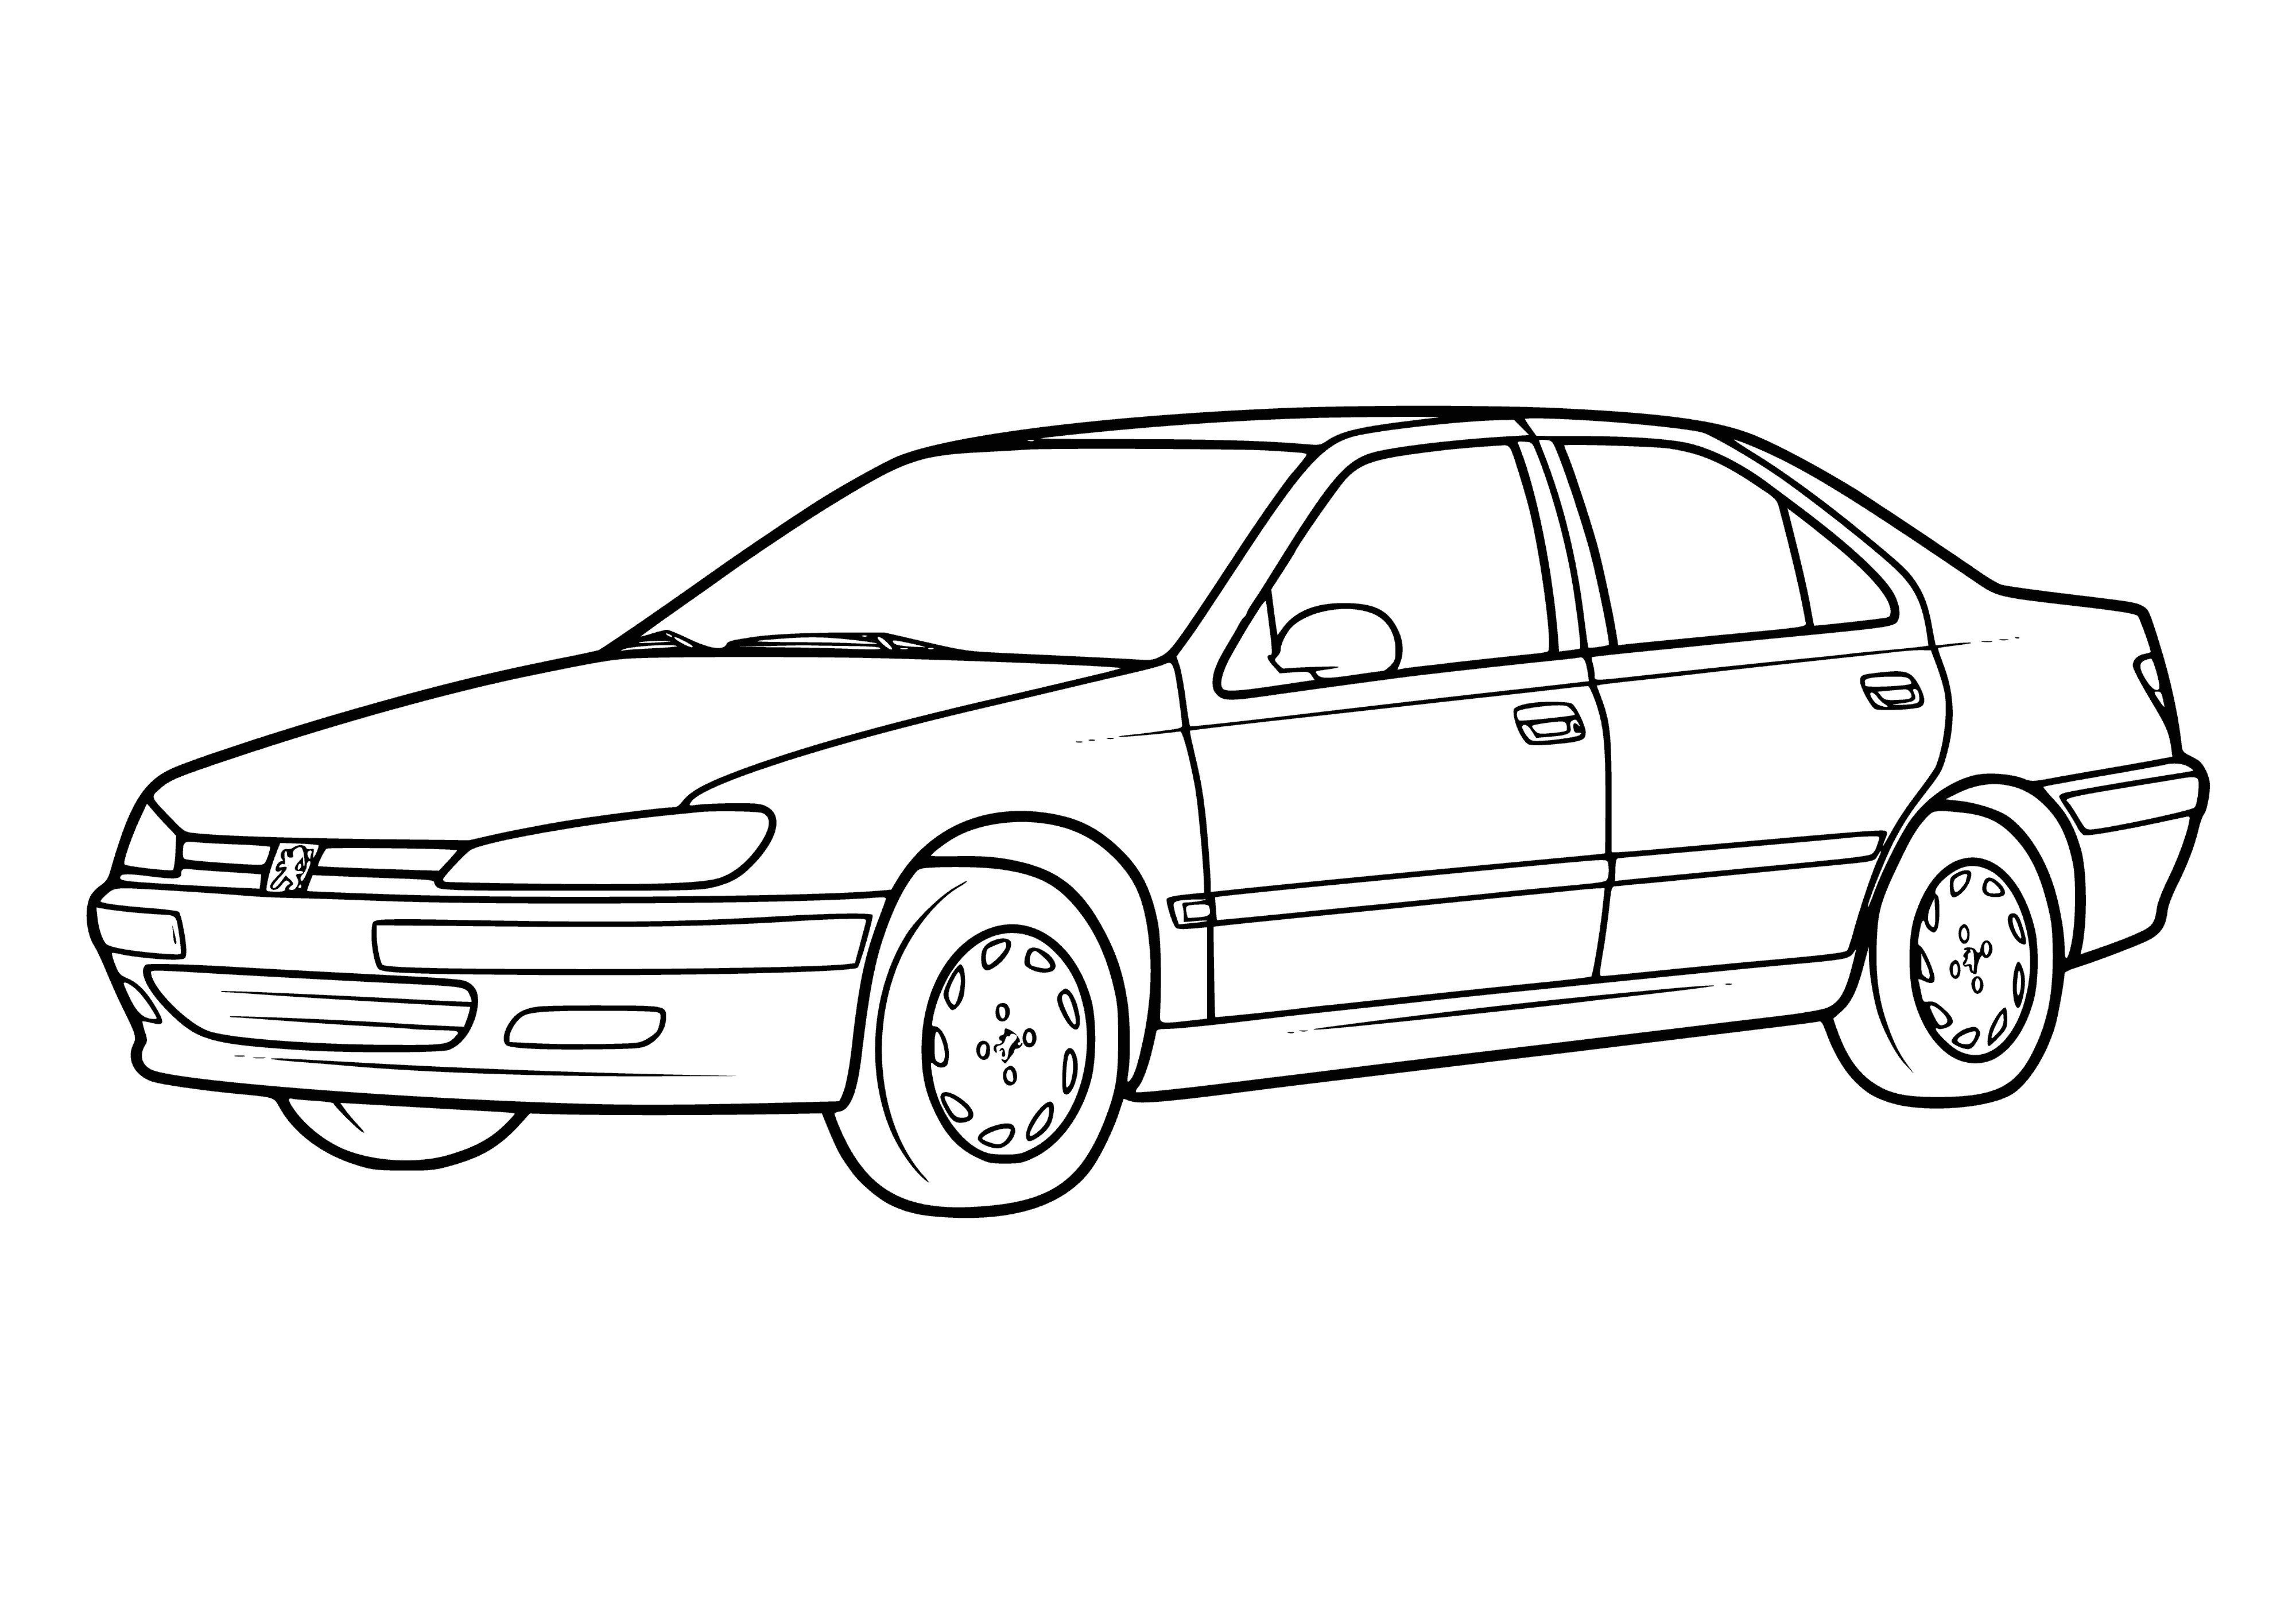 coloring page: Light blue Peugeot w/ long body, short front, four round headlights, long thin grille w/ Peugeot logo, 4 round wheel wells, tinted windows, 4 doors.